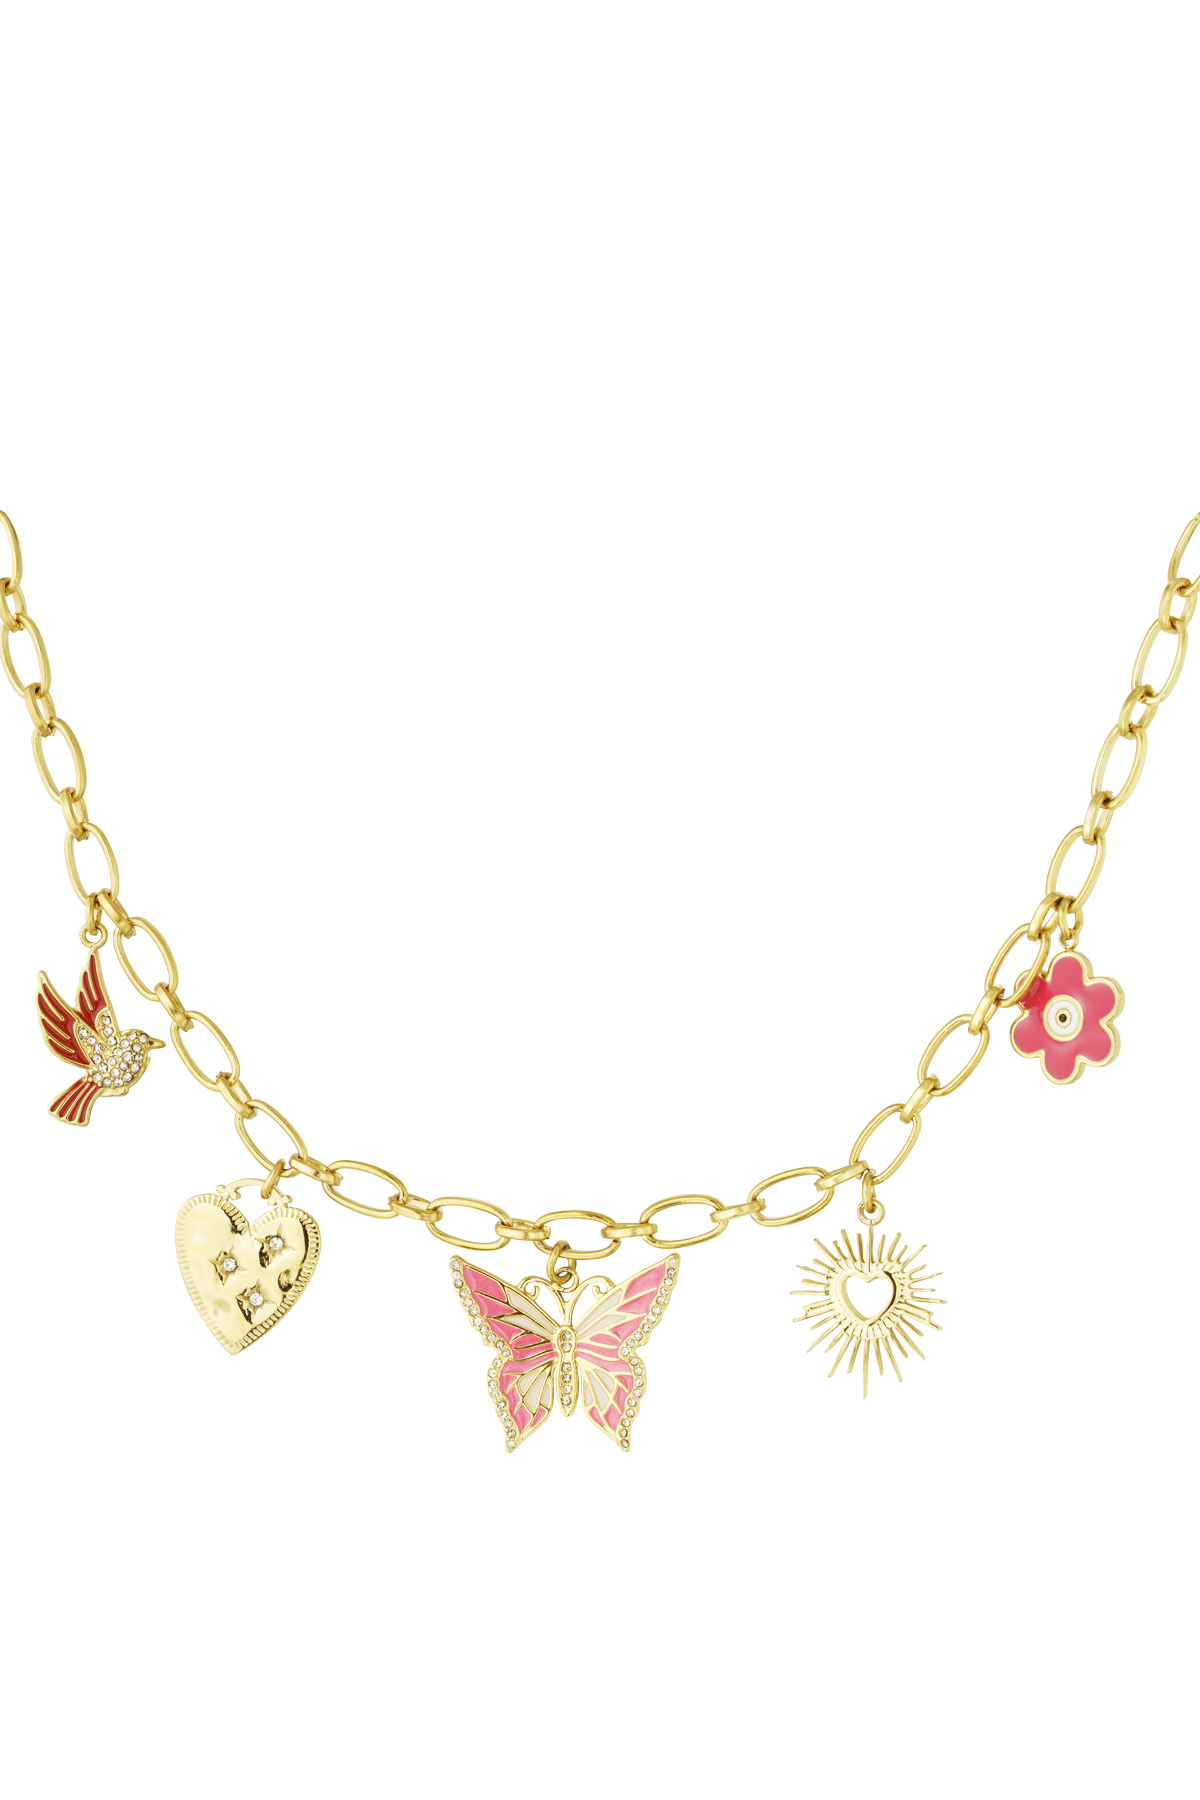 Charm necklace nature calls - gold pink